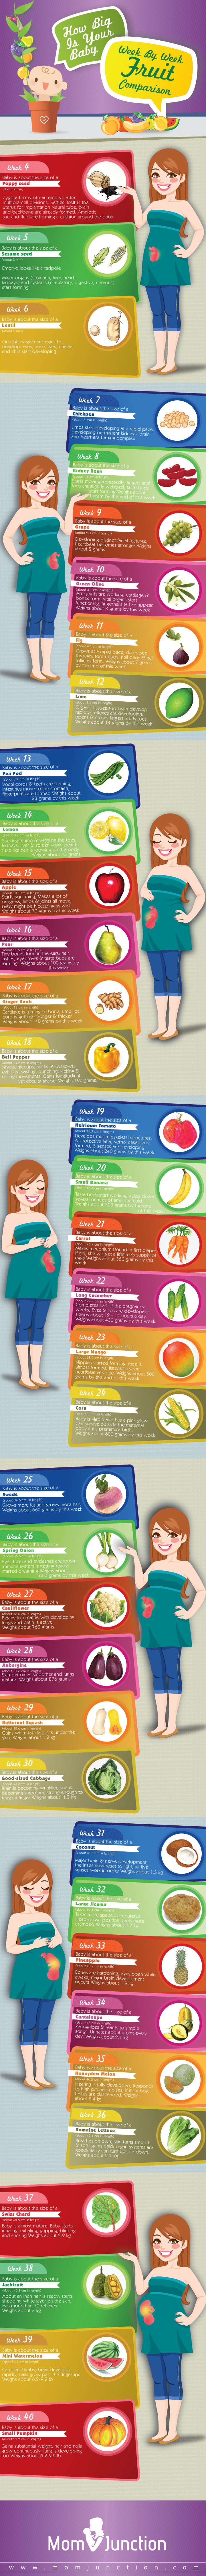 How Big Is Your Baby - Week By Week Fruit Comparison